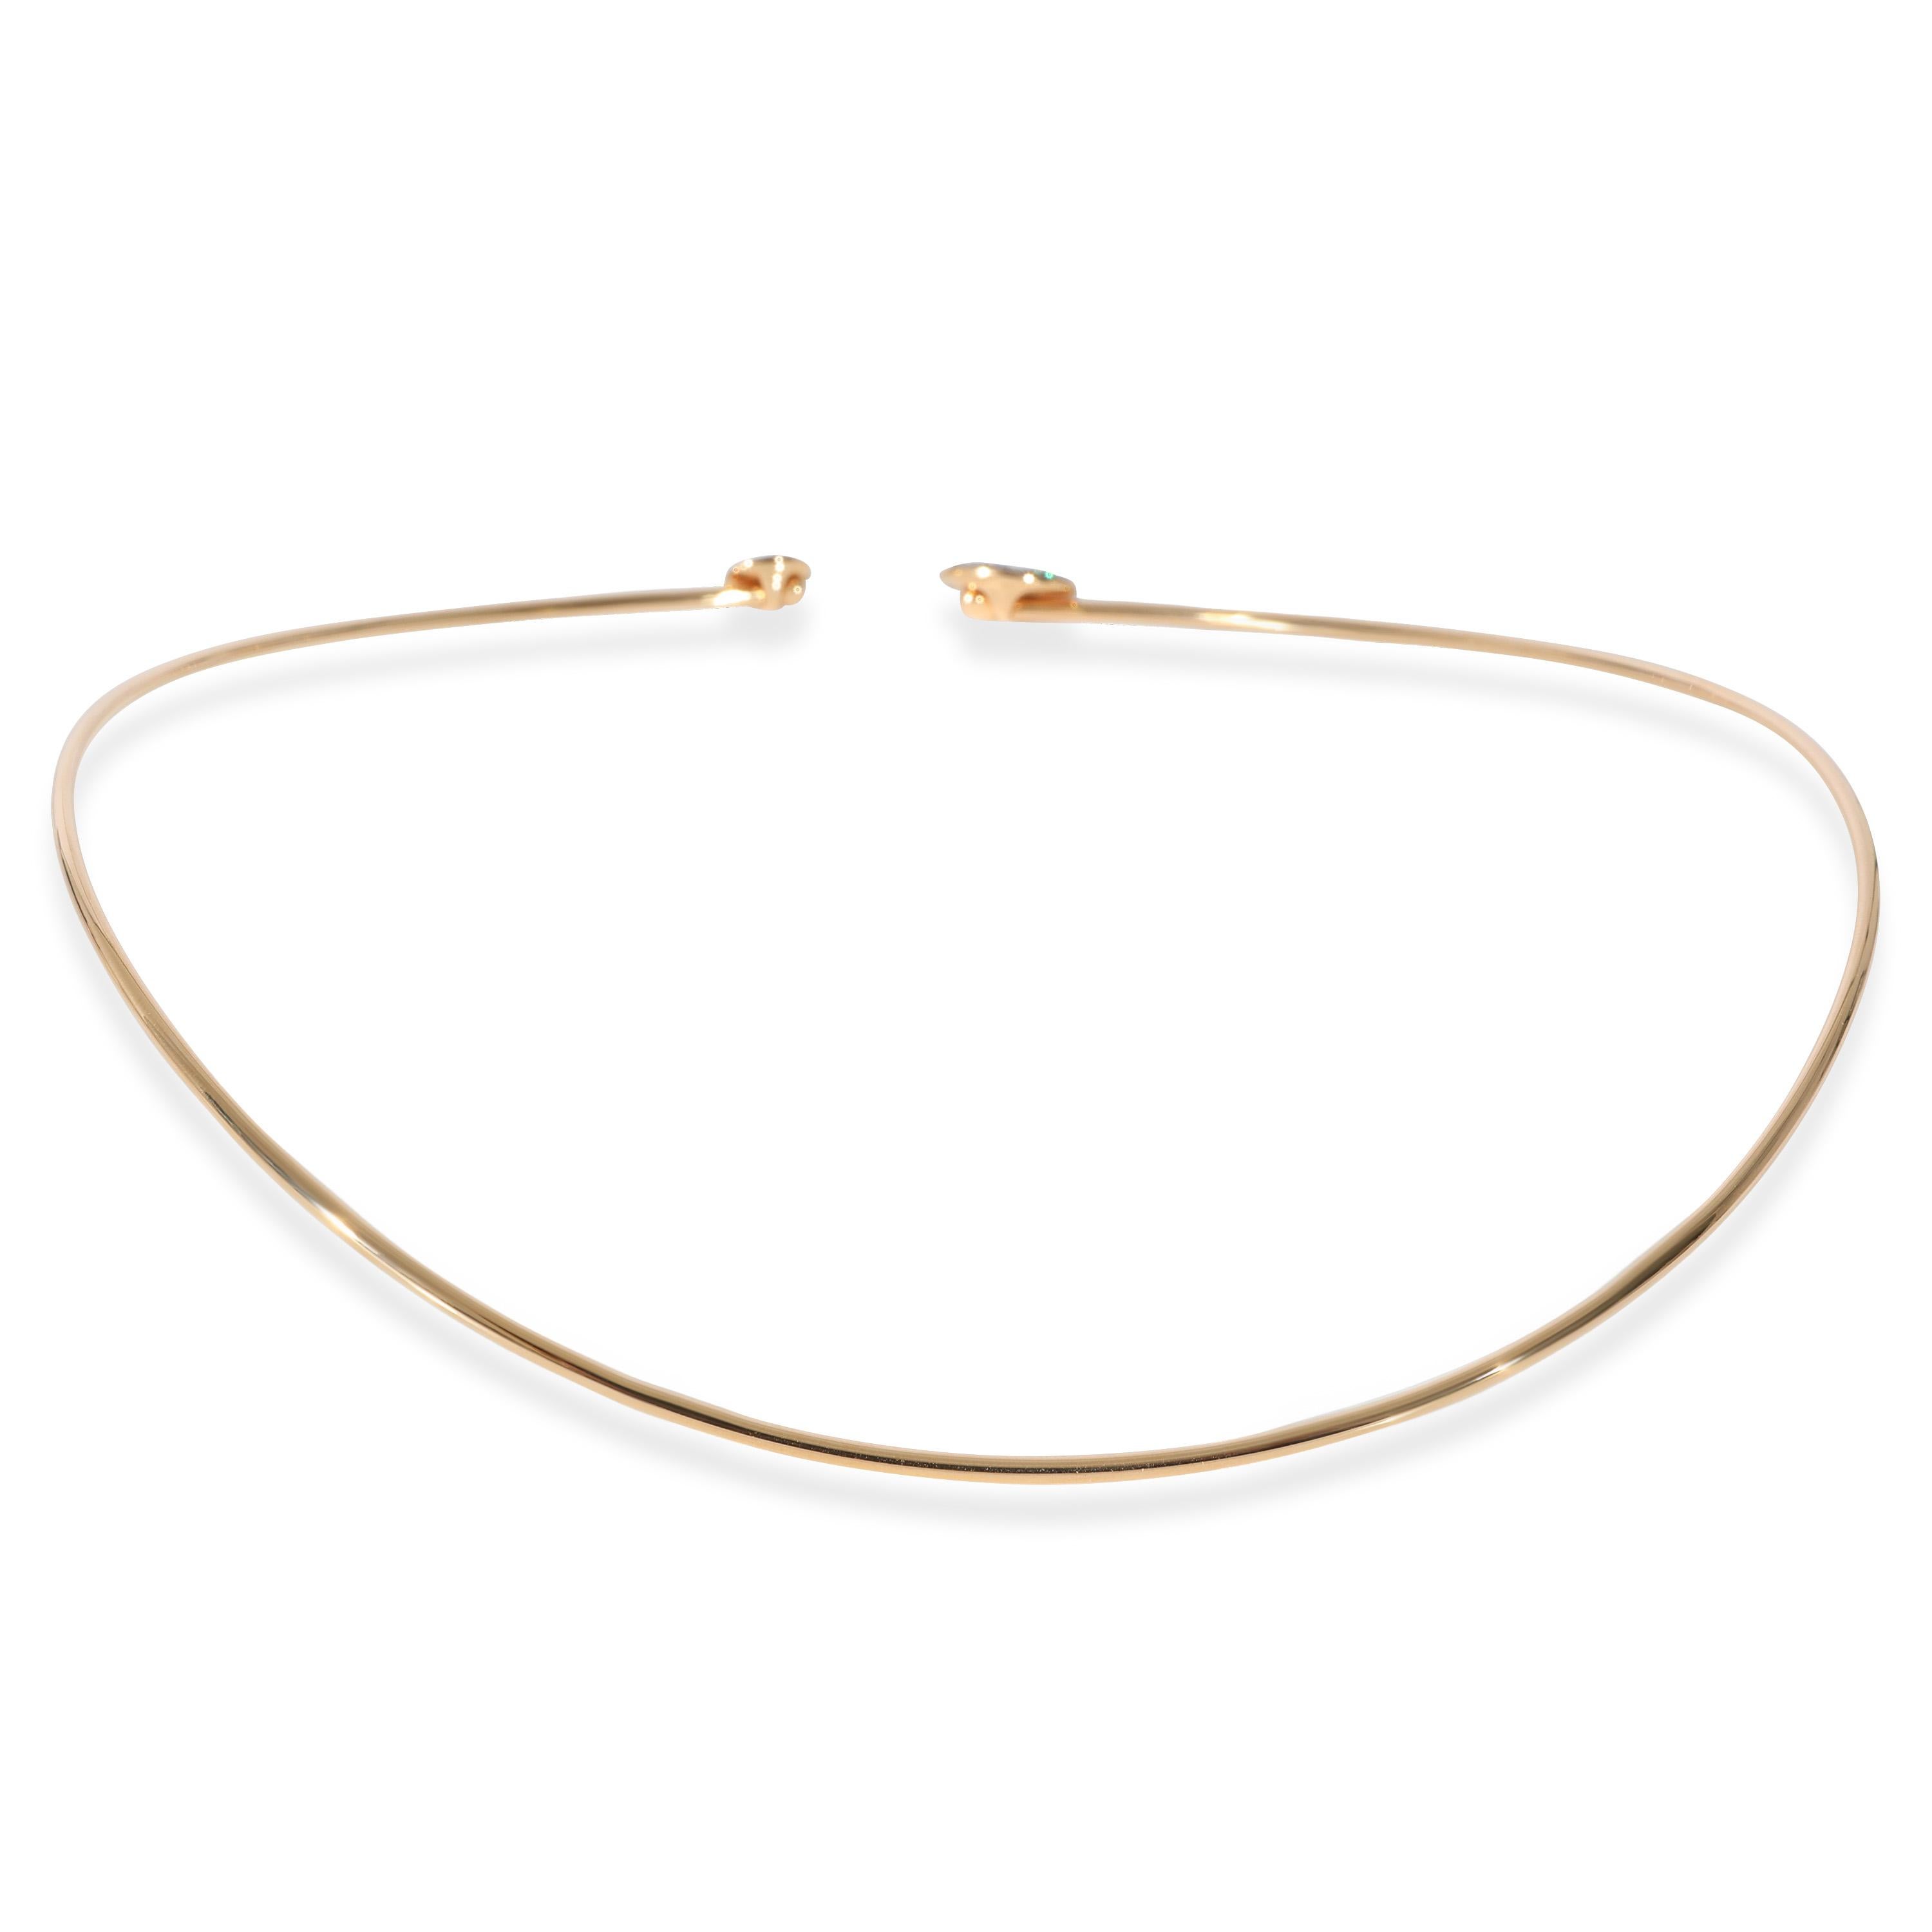 Pomellato Sabbia Diamond Choker Necklace in 18k Rose Gold 0.98 CTW

PRIMARY DETAILS
SKU: 129878
Listing Title: Pomellato Sabbia Diamond Choker Necklace in 18k Rose Gold 0.98 CTW
Condition Description: Retails for 5600 USD. In excellent condition. 